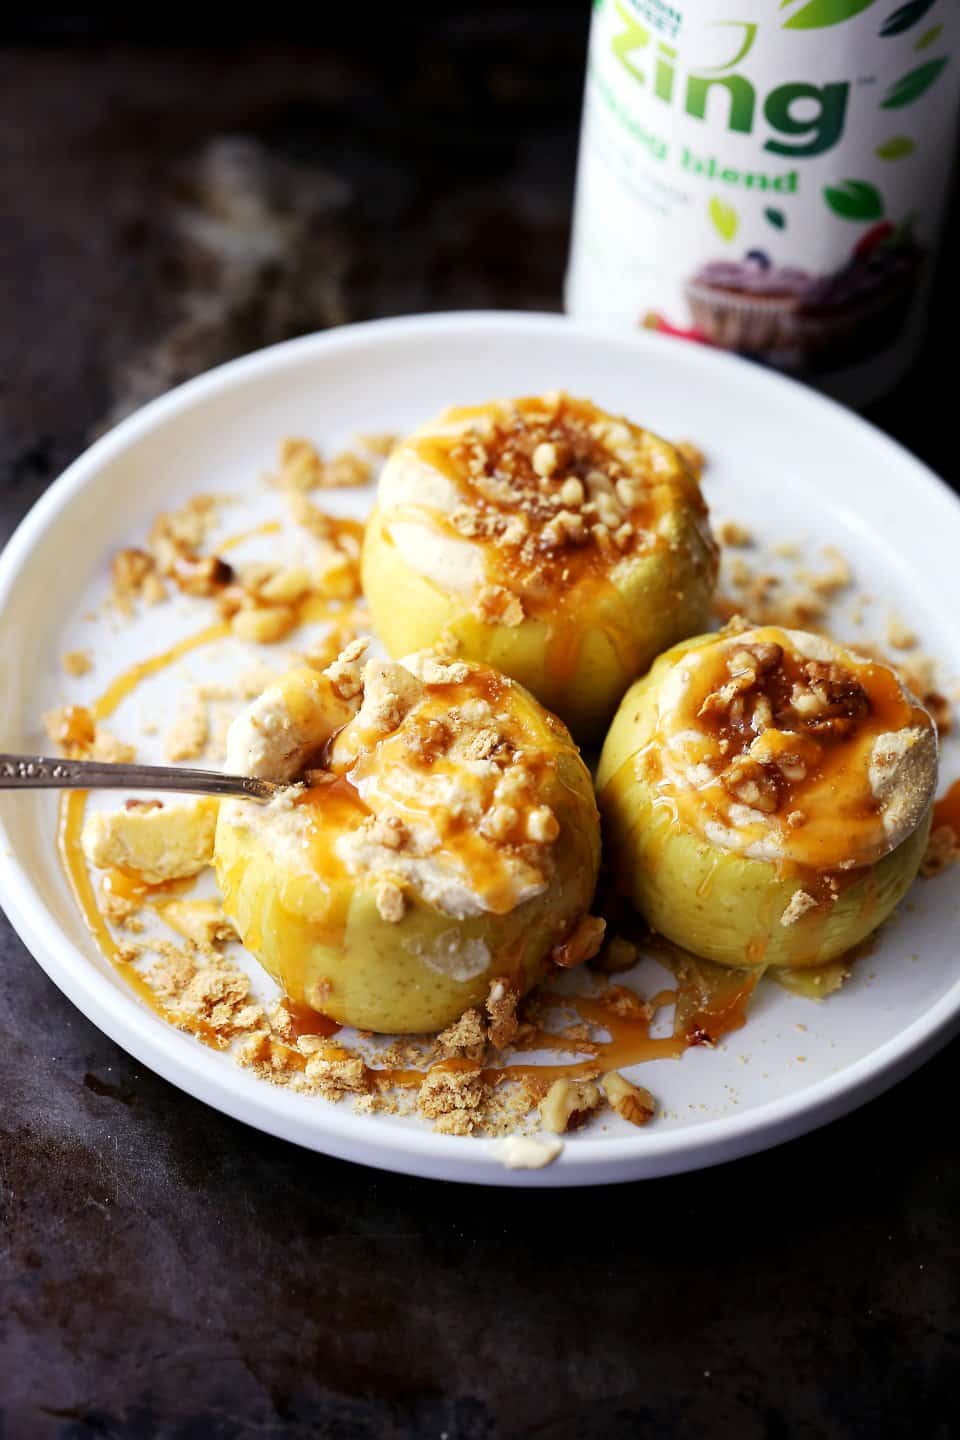 Three cheesecake-stuffed baked apples topped with caramel sauce.